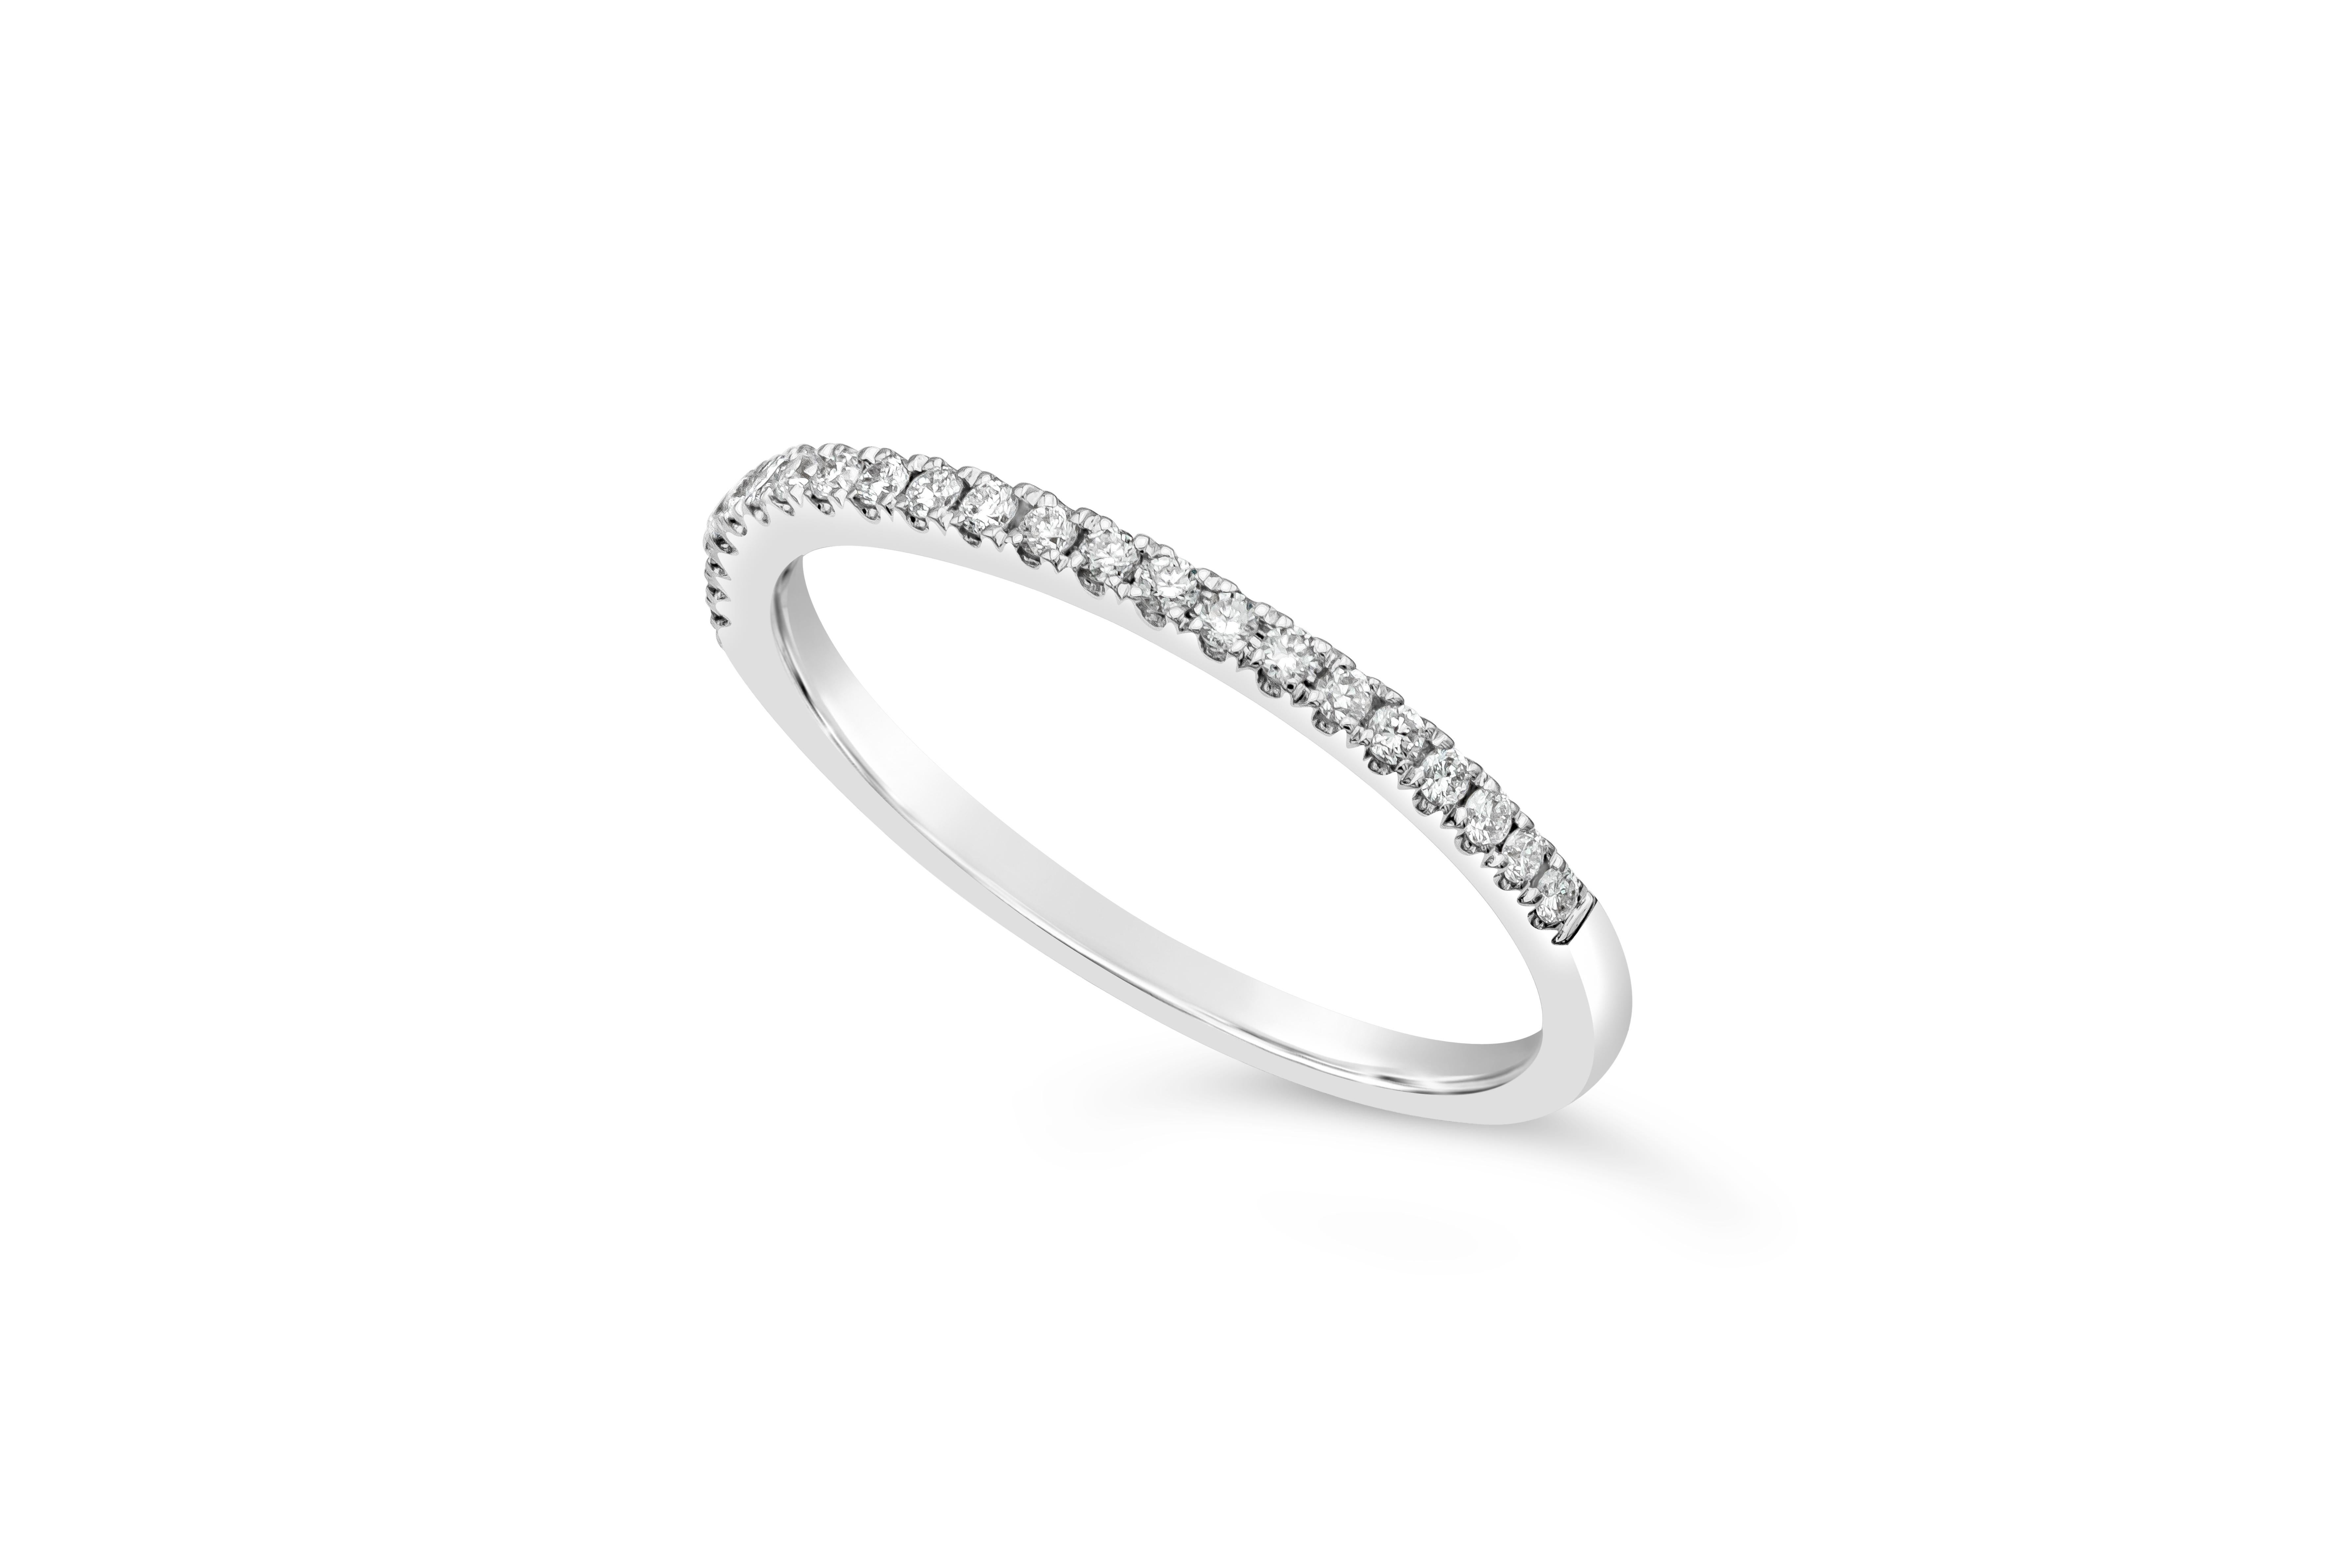 A classic half way eternity band style showcasing a row of 22 round brilliant Diamond weighing at 0.13 carat total, F-G color and VS-SI clarity.  Made with 18K White Gold

Style available in different price ranges. Prices are based on your